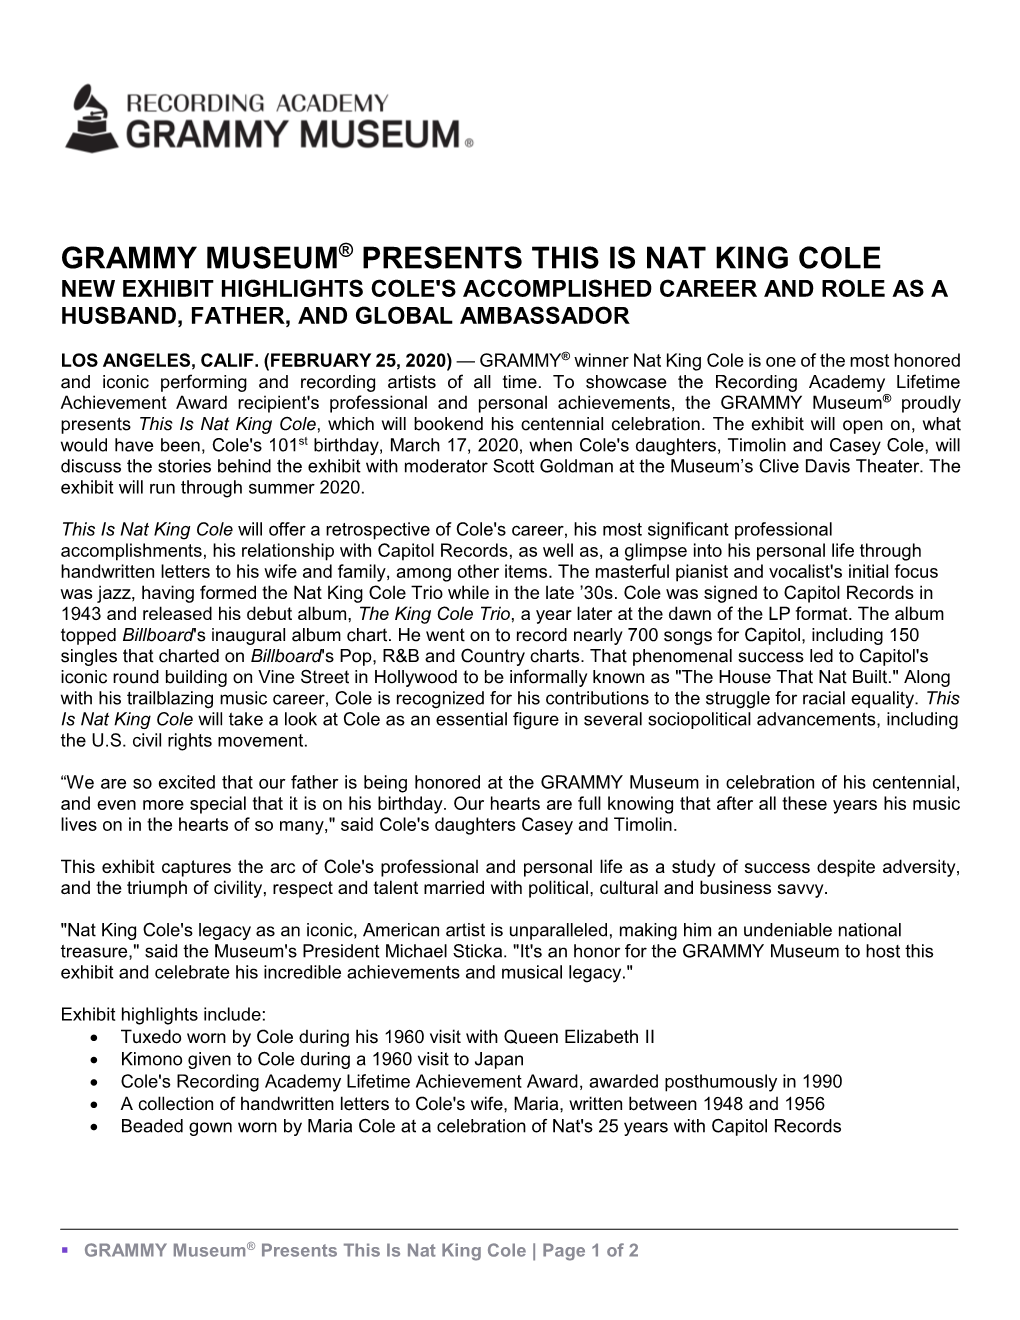 Grammy Museum® Presents This Is Nat King Cole New Exhibit Highlights Cole's Accomplished Career and Role As a Husband, Father, and Global Ambassador